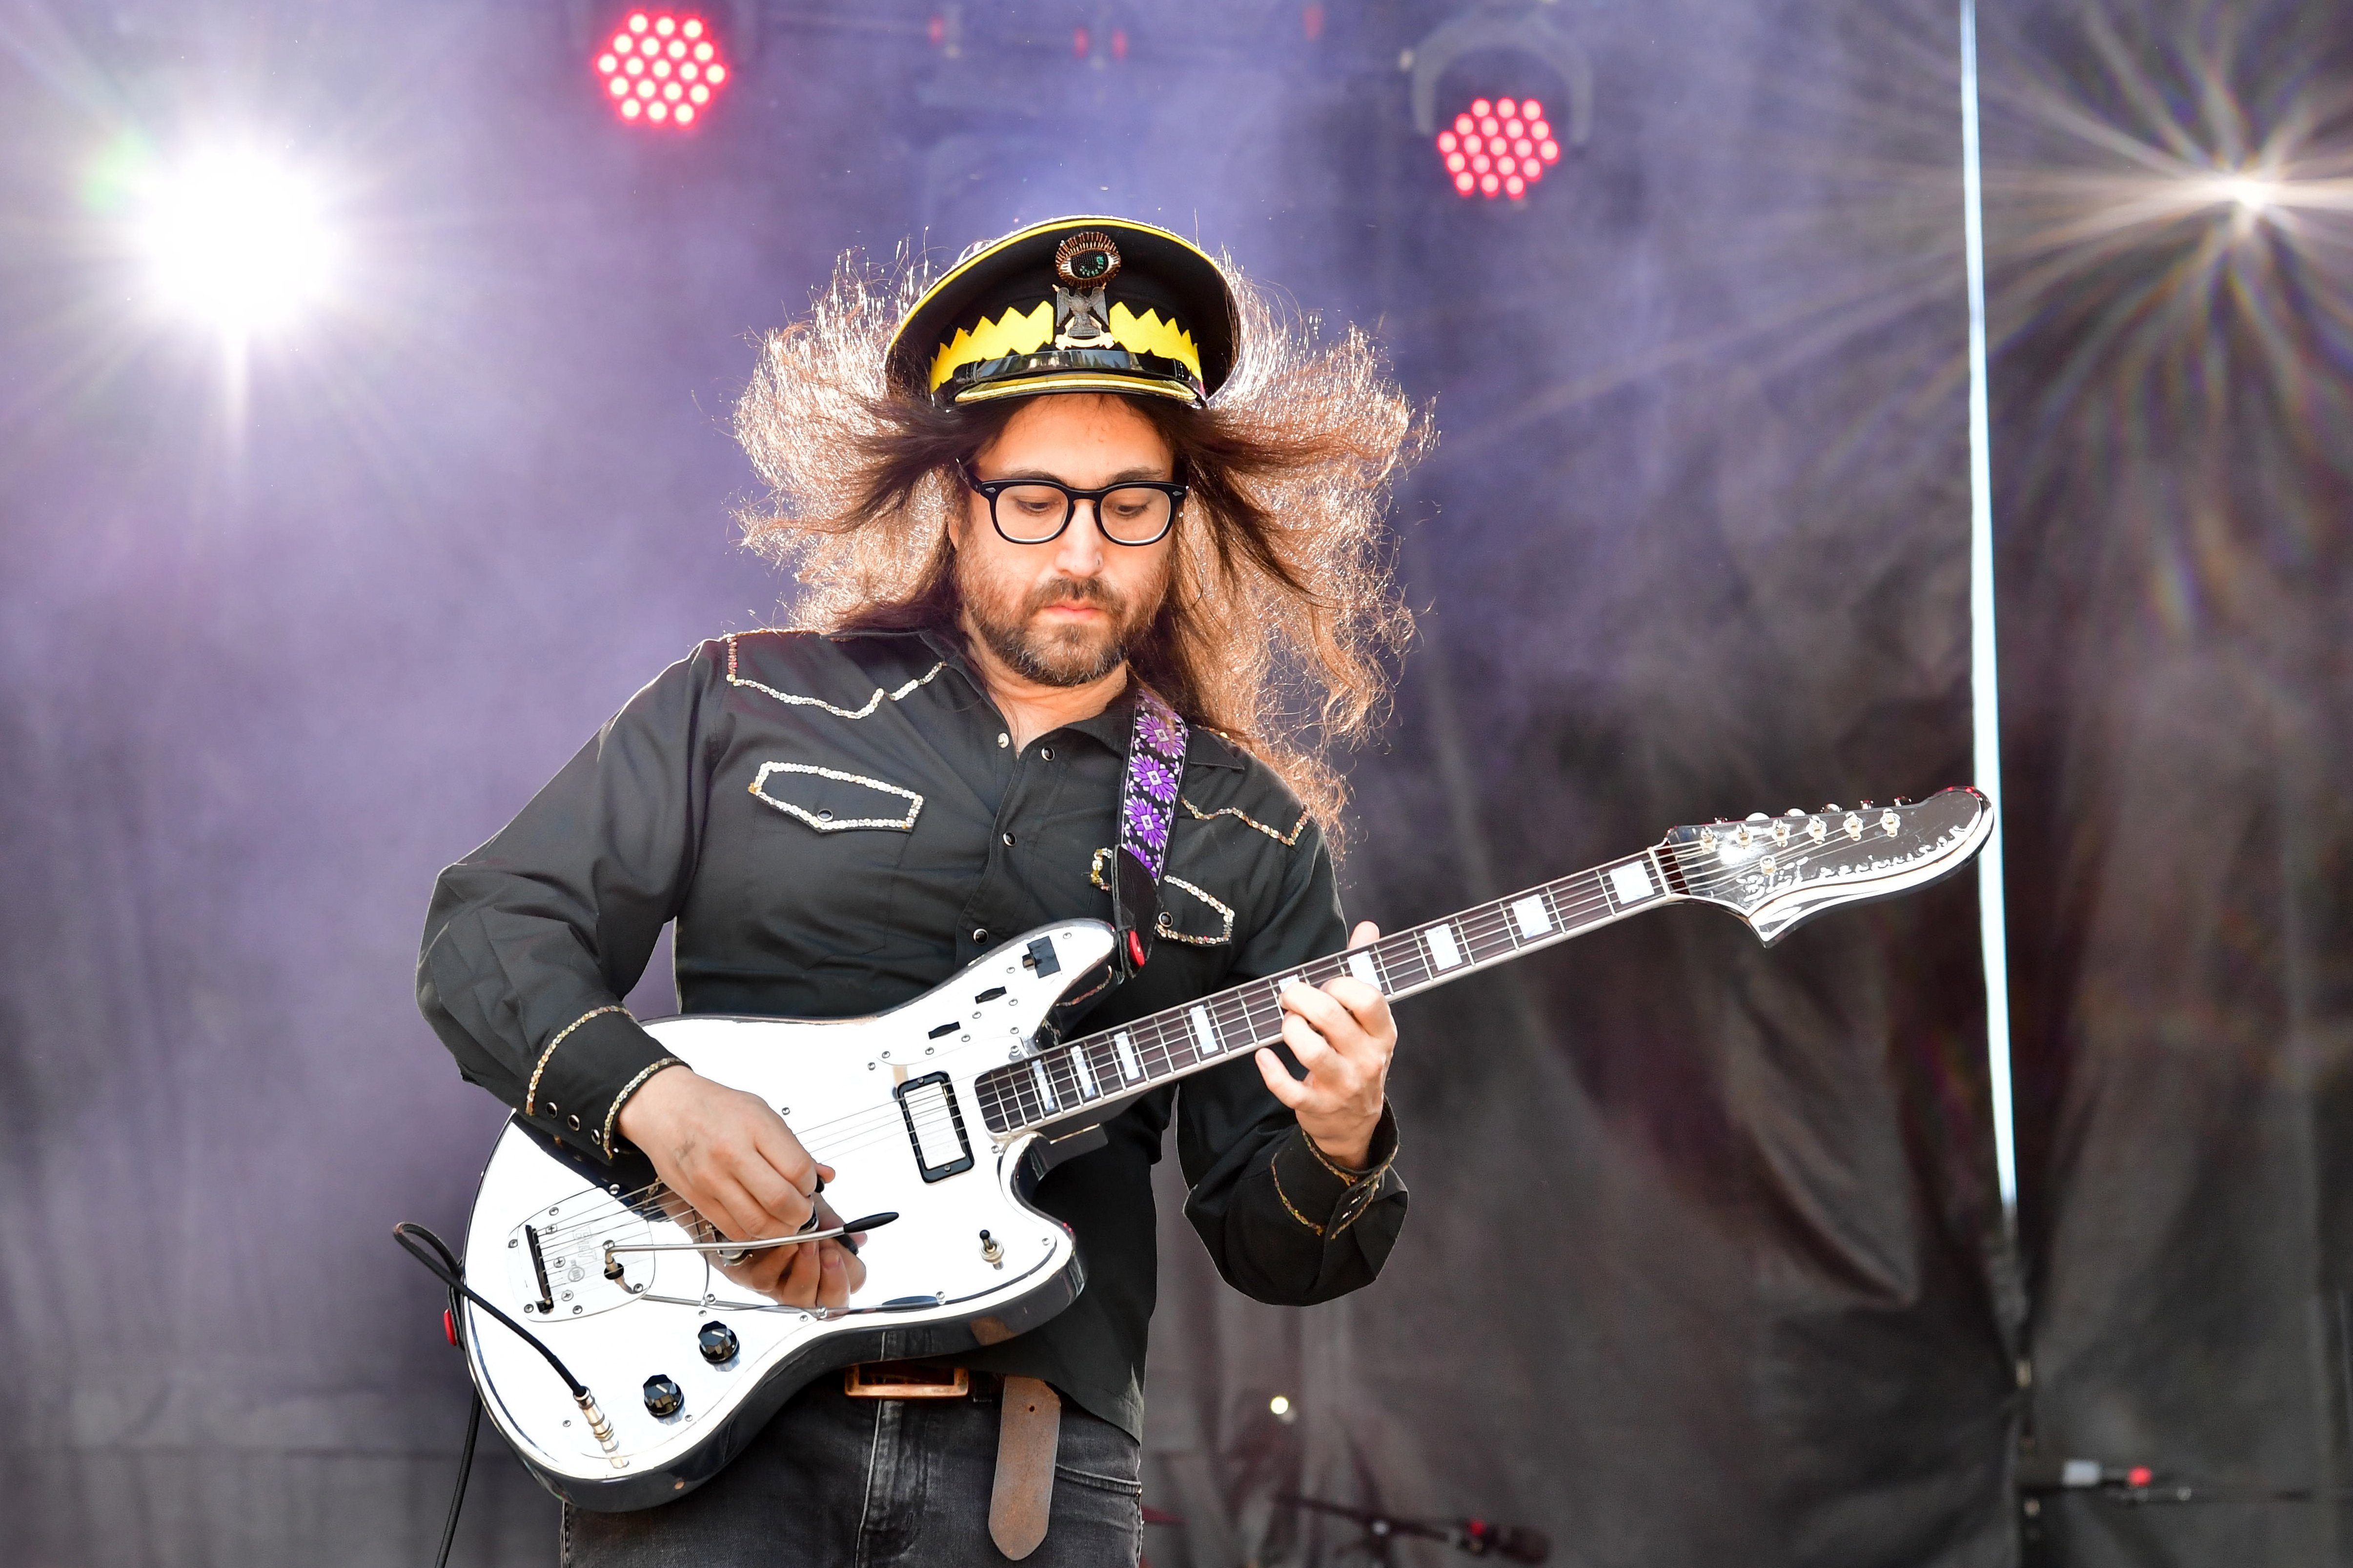 Sean Lennon performs during 2019 Sweetwater 420 Festival at Centennial Olympic Park on April 21, 2019, in Atlanta, Georgia. | Source: Getty Images.